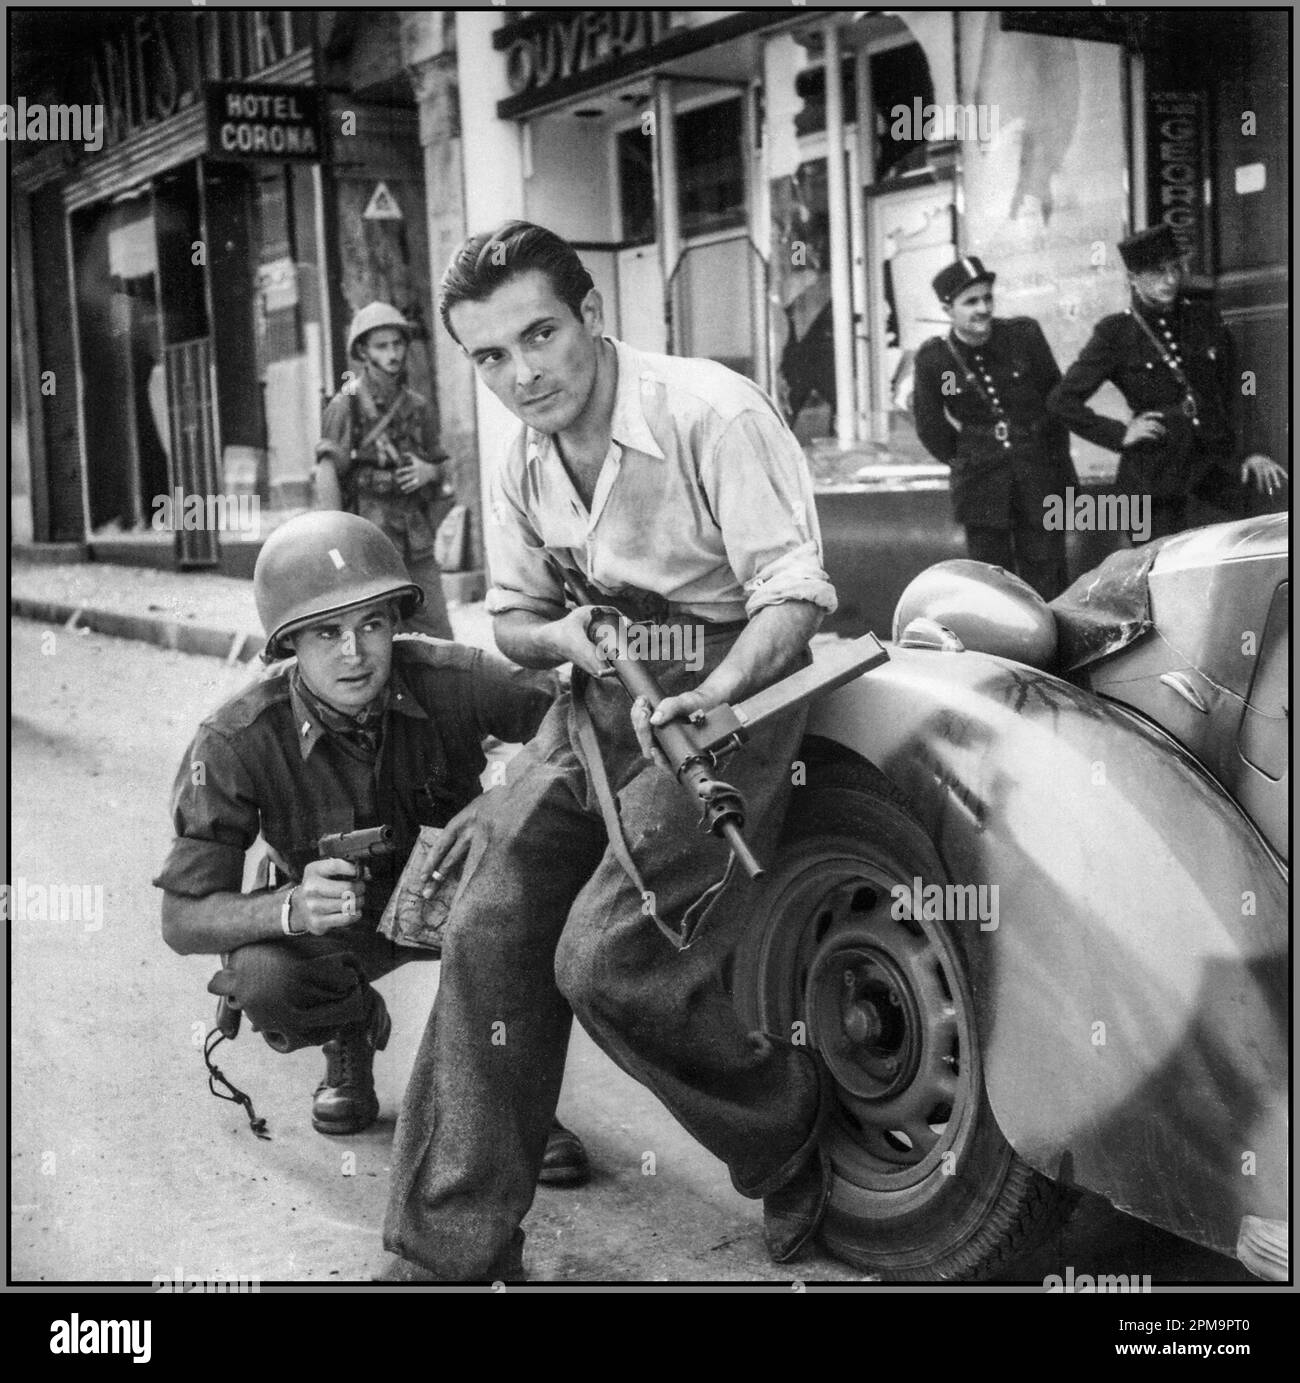 FRENCH RESISTANCE PARTISAN 1944 American Lieutenant Edwin E. Dowell with a Colt pistol and a French partisan with an English-made submachine gun during a street battle in Marseille. France. Noteworthy are the police officers in the background and the camouflage coloring of the car. Marseille France.The French Resistance (French: La Résistance) was a collection of groups that fought the Nazi occupation of France and the collaborationist Vichy régime in France during the Second World War. Resistance cells were small groups of armed men and women called the Maquis in rural France Stock Photo